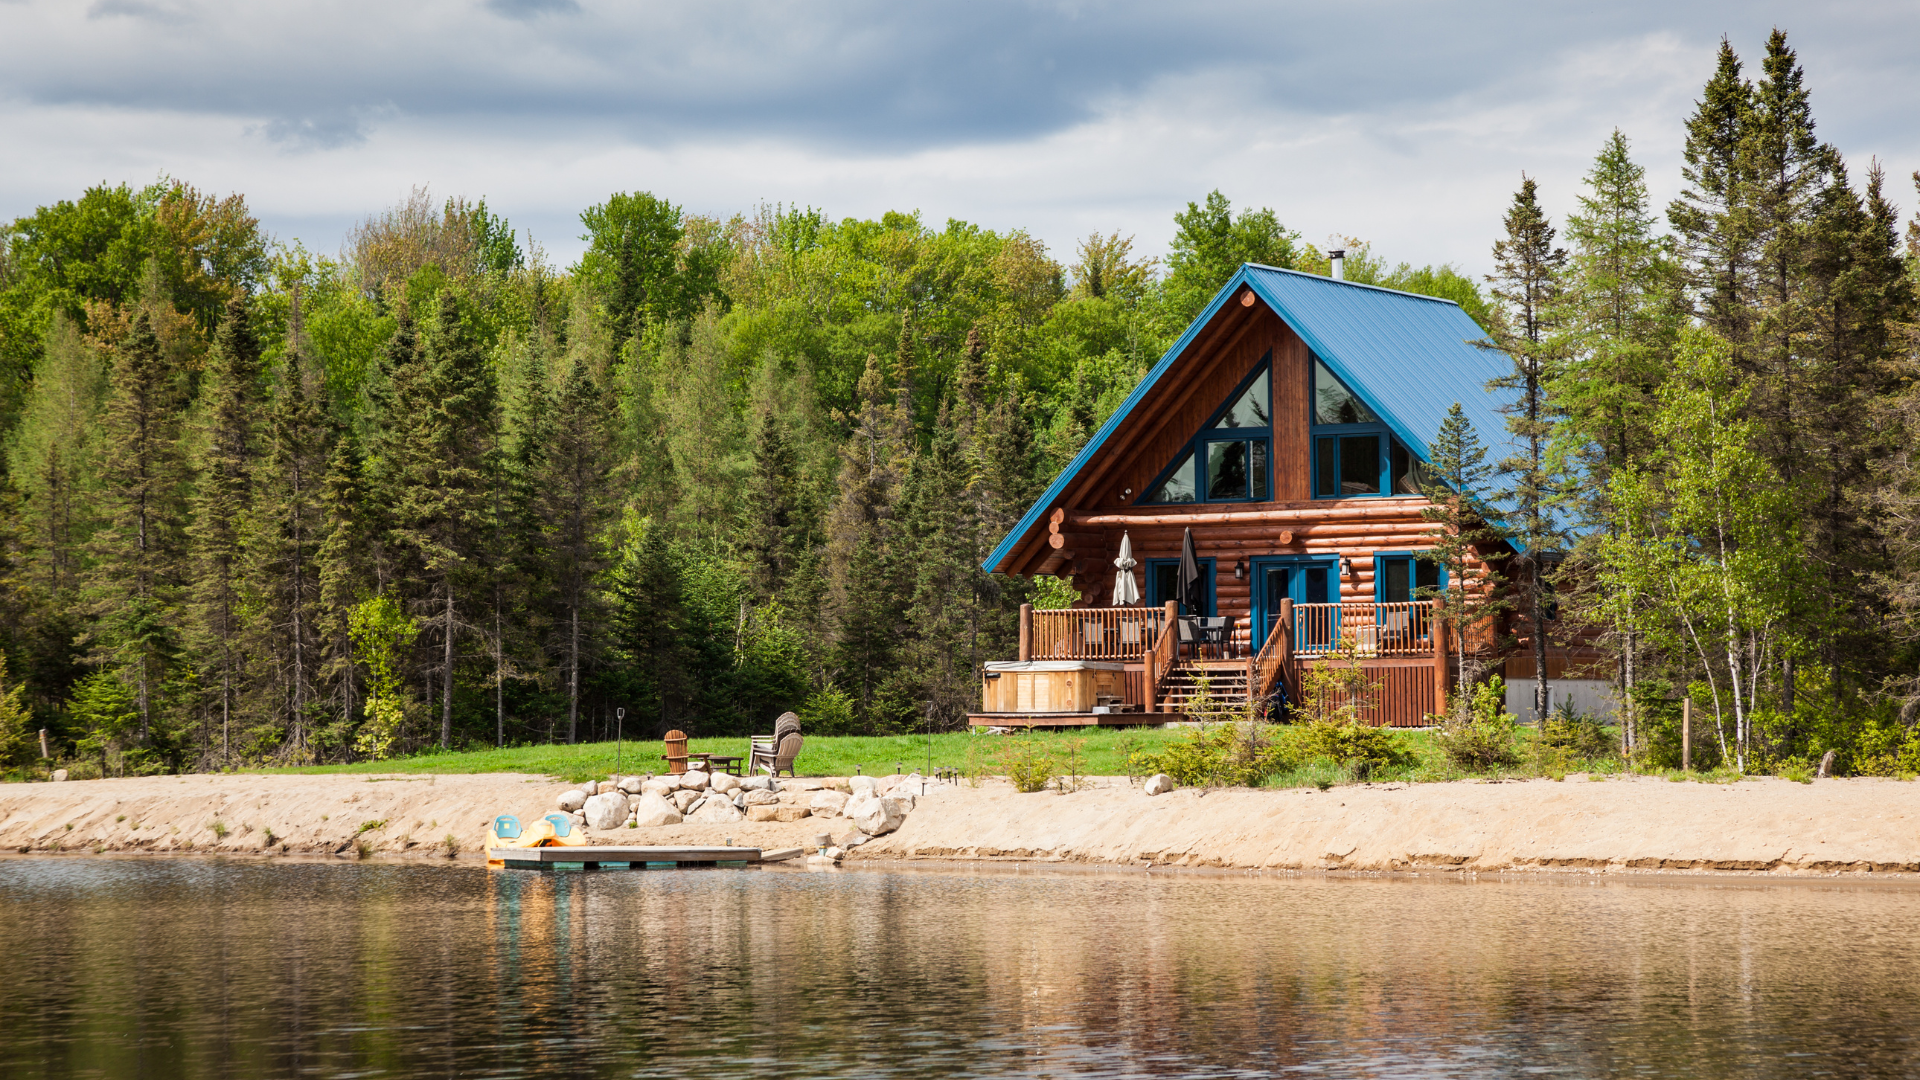 a log cabin with a blue roof is sitting on the shore of a lake surrounded by trees .